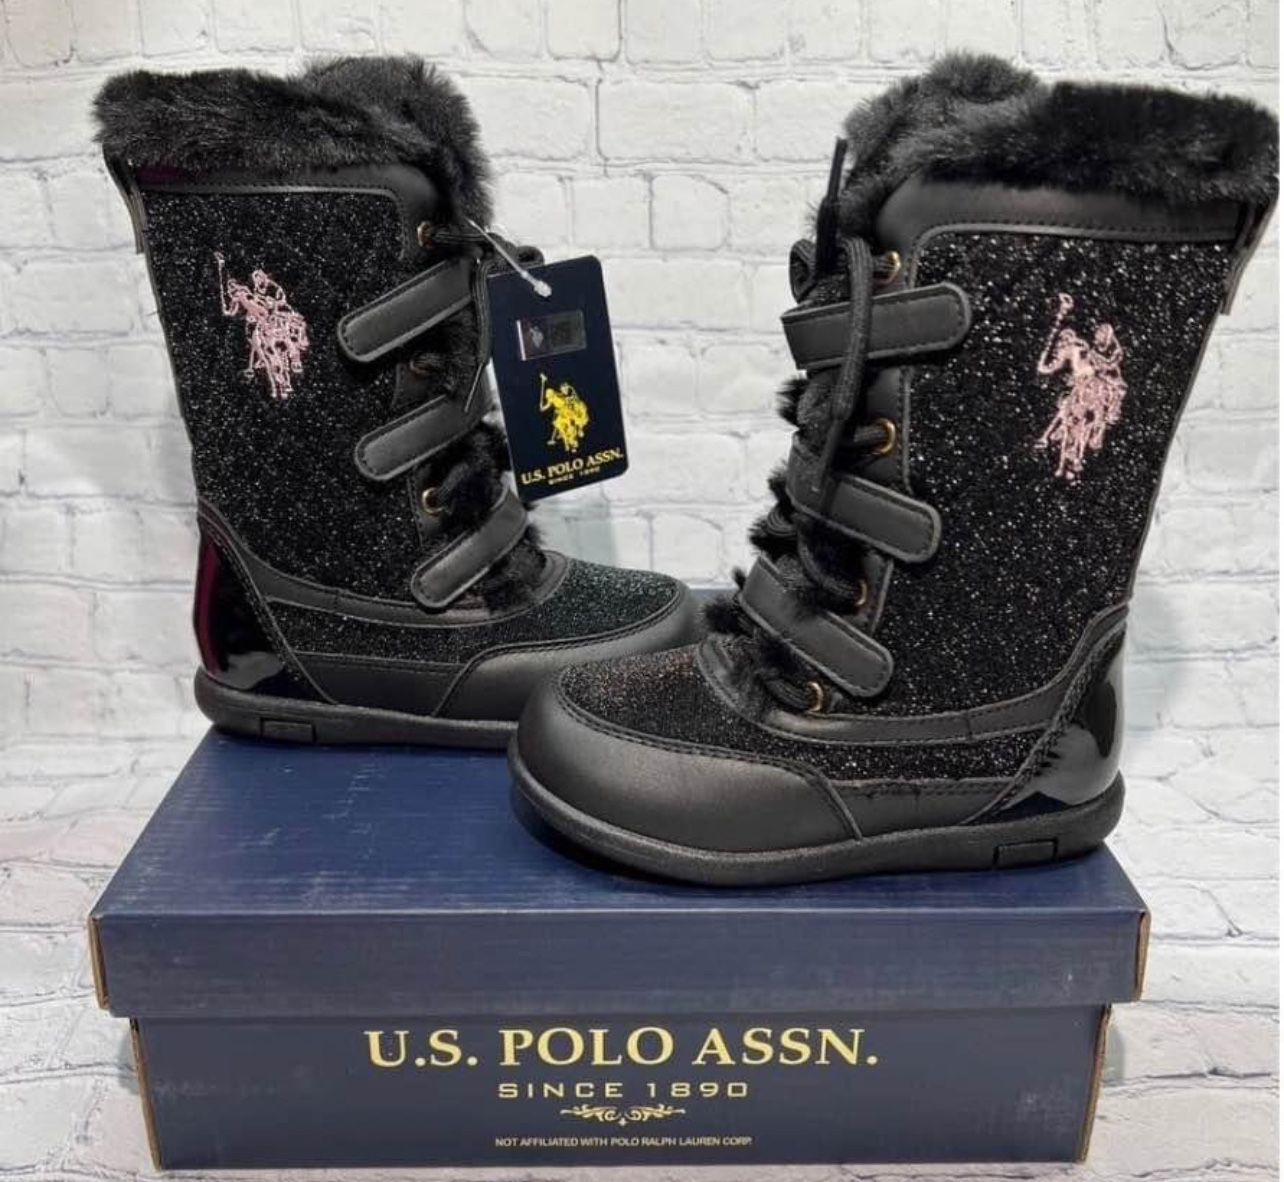 U.S. Polo Assn. Girls Winter Boots Black Shimmer ToddlerNEW